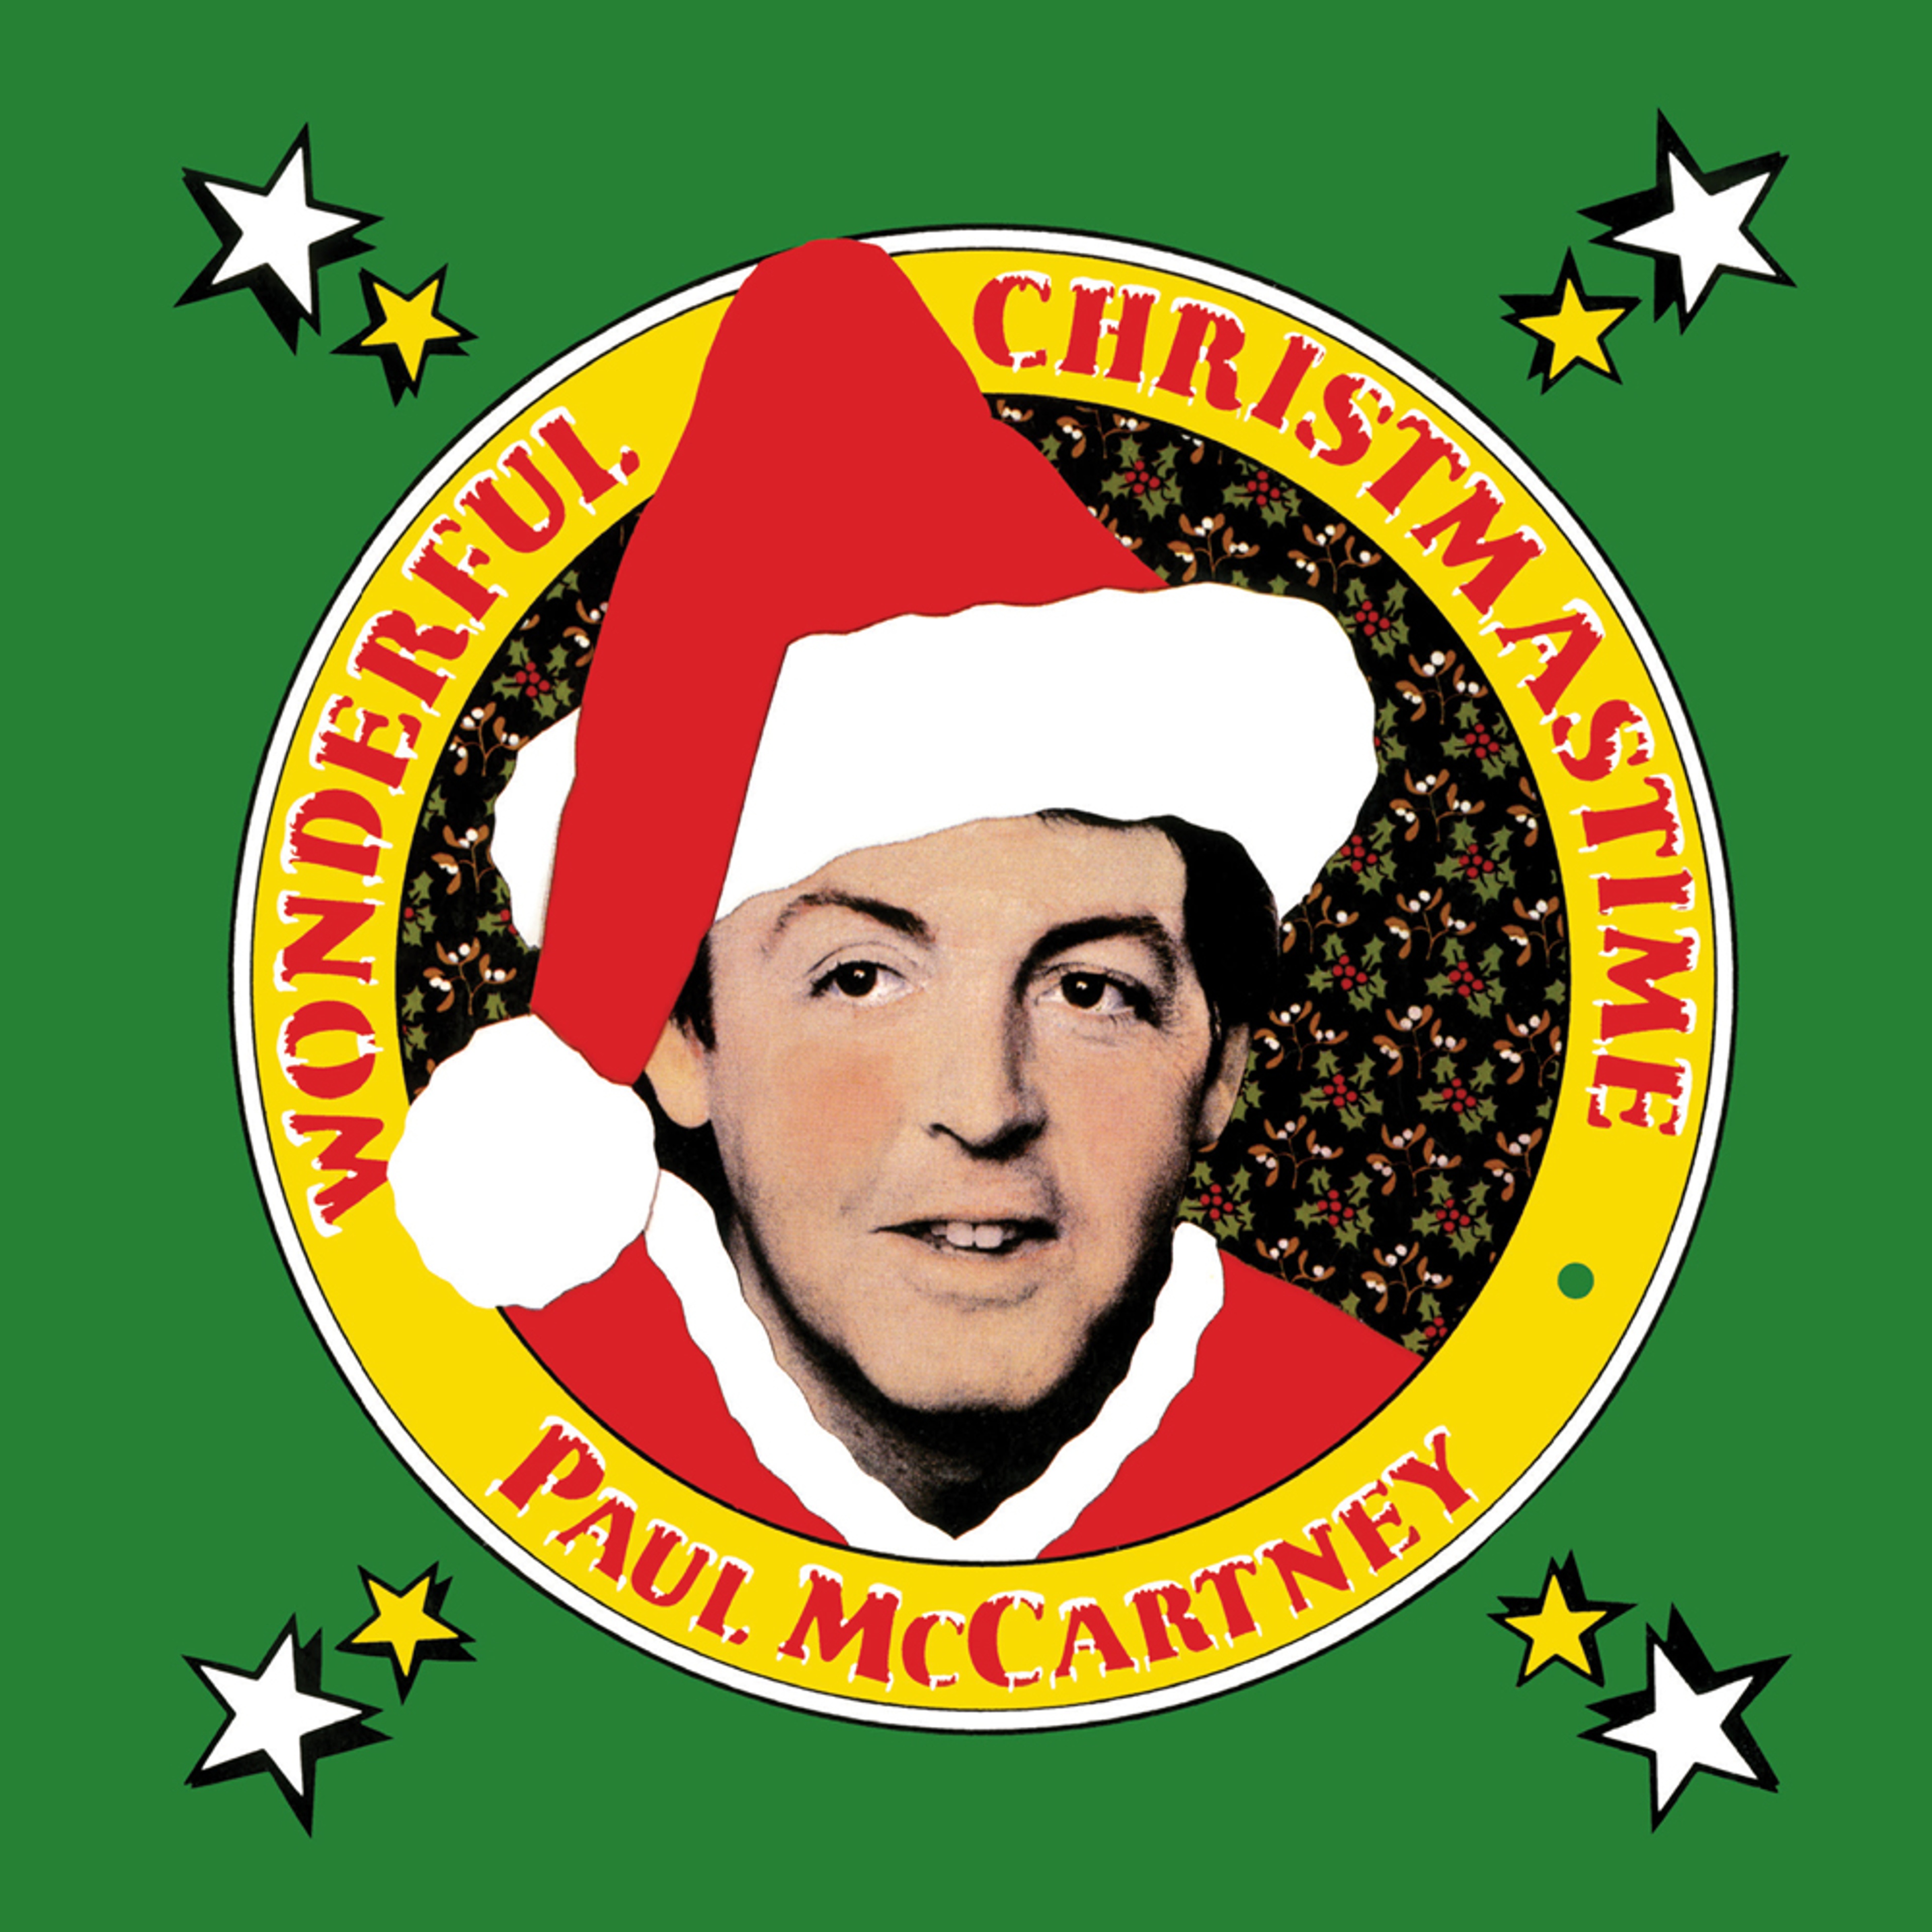 “Wonderful Christmastime” single artwork as featured in 'The 7" Singles Box' 